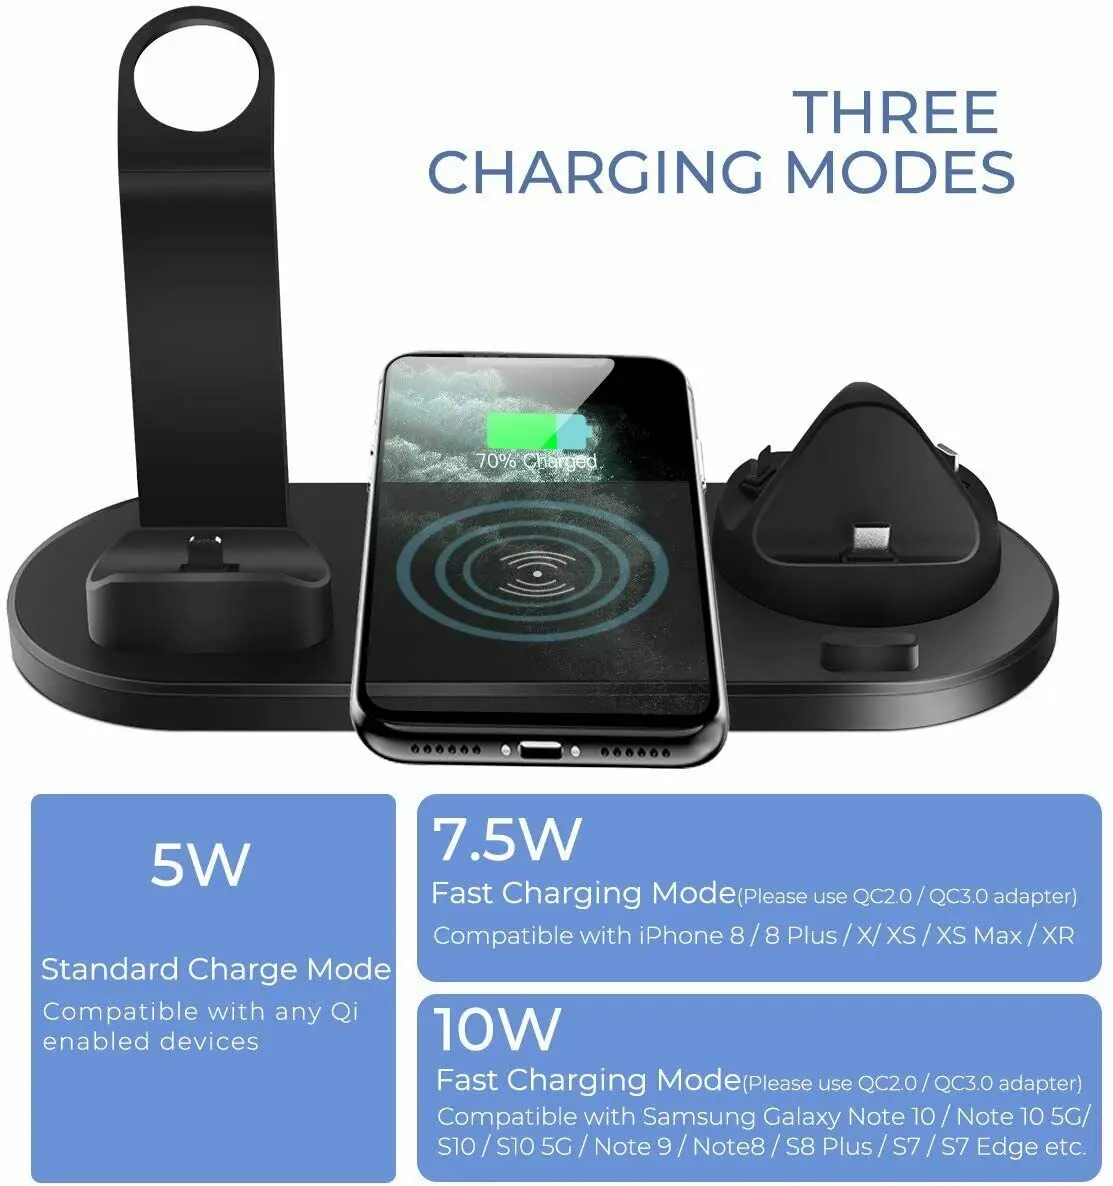 3 in 1 qi wireless mobile phone charger for bluetooth headphone watch rotattable charging dock for iphone samsung huawei xiaomi free global shipping